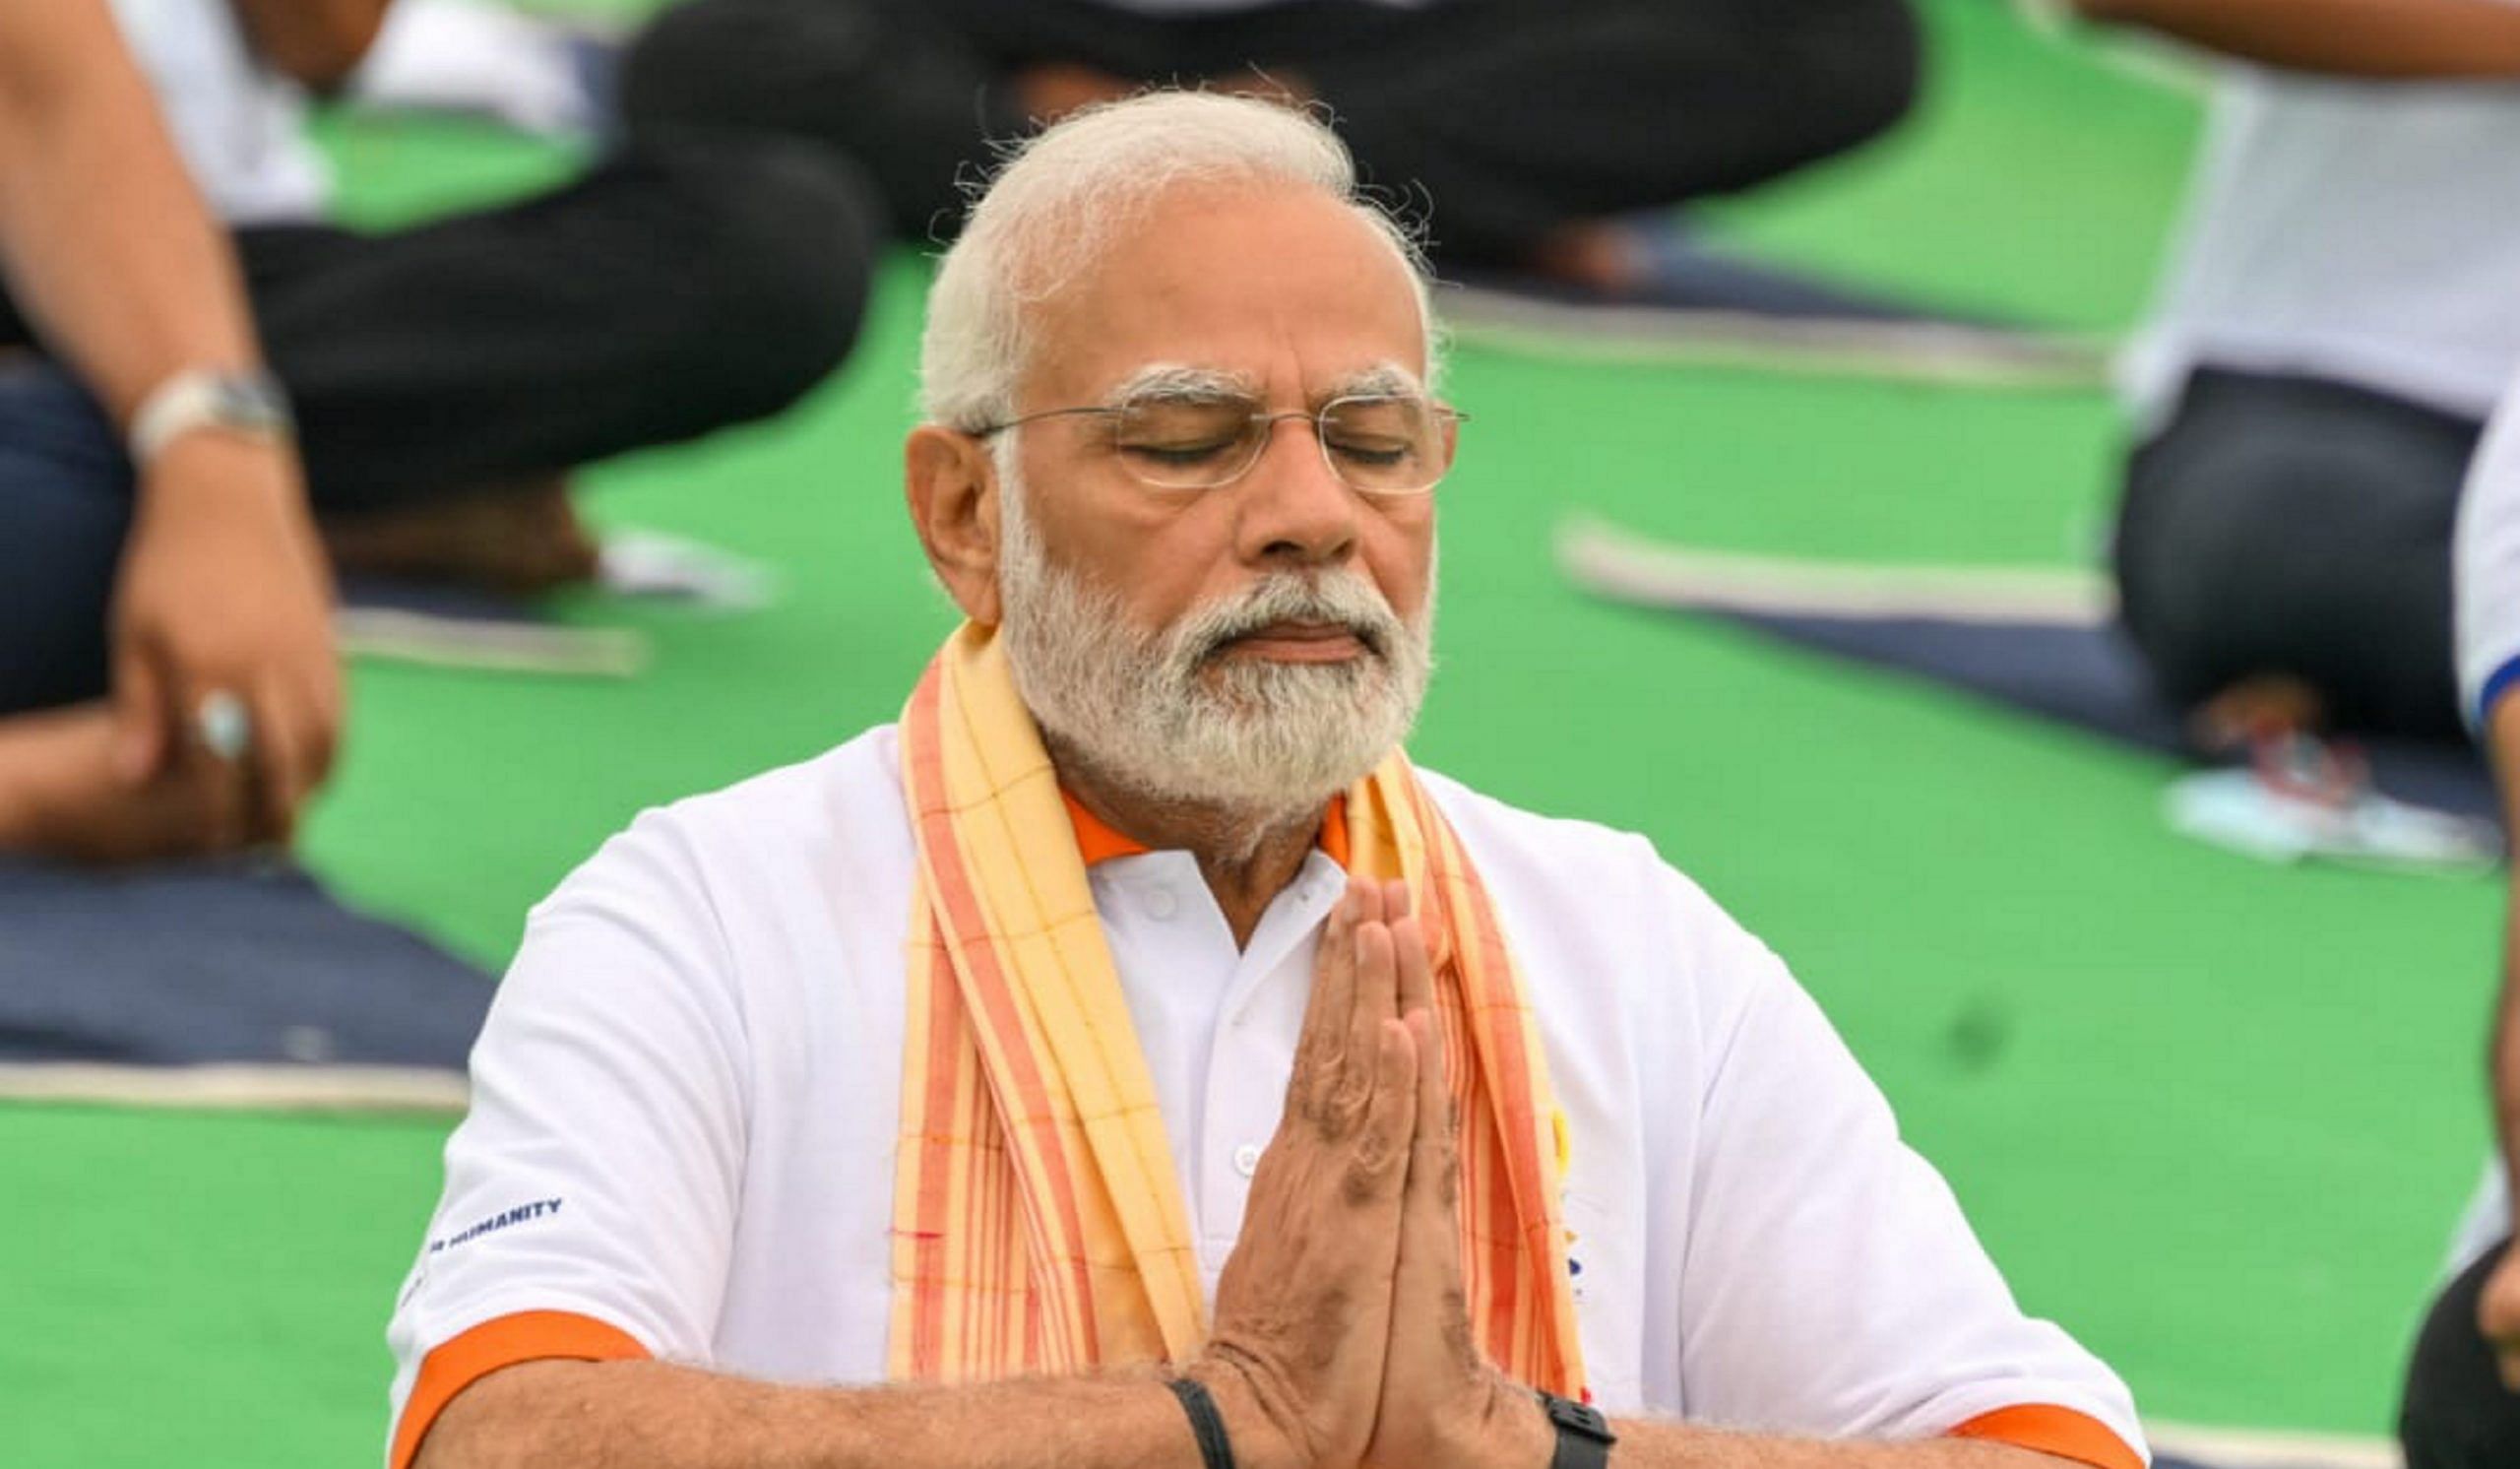 Prime Minister Narendra Modi performs yoga at the main event of the eighth edition of the International Day of Yoga at the Mysore Palace in Karnataka on 21 June 2022 | PTI Photo